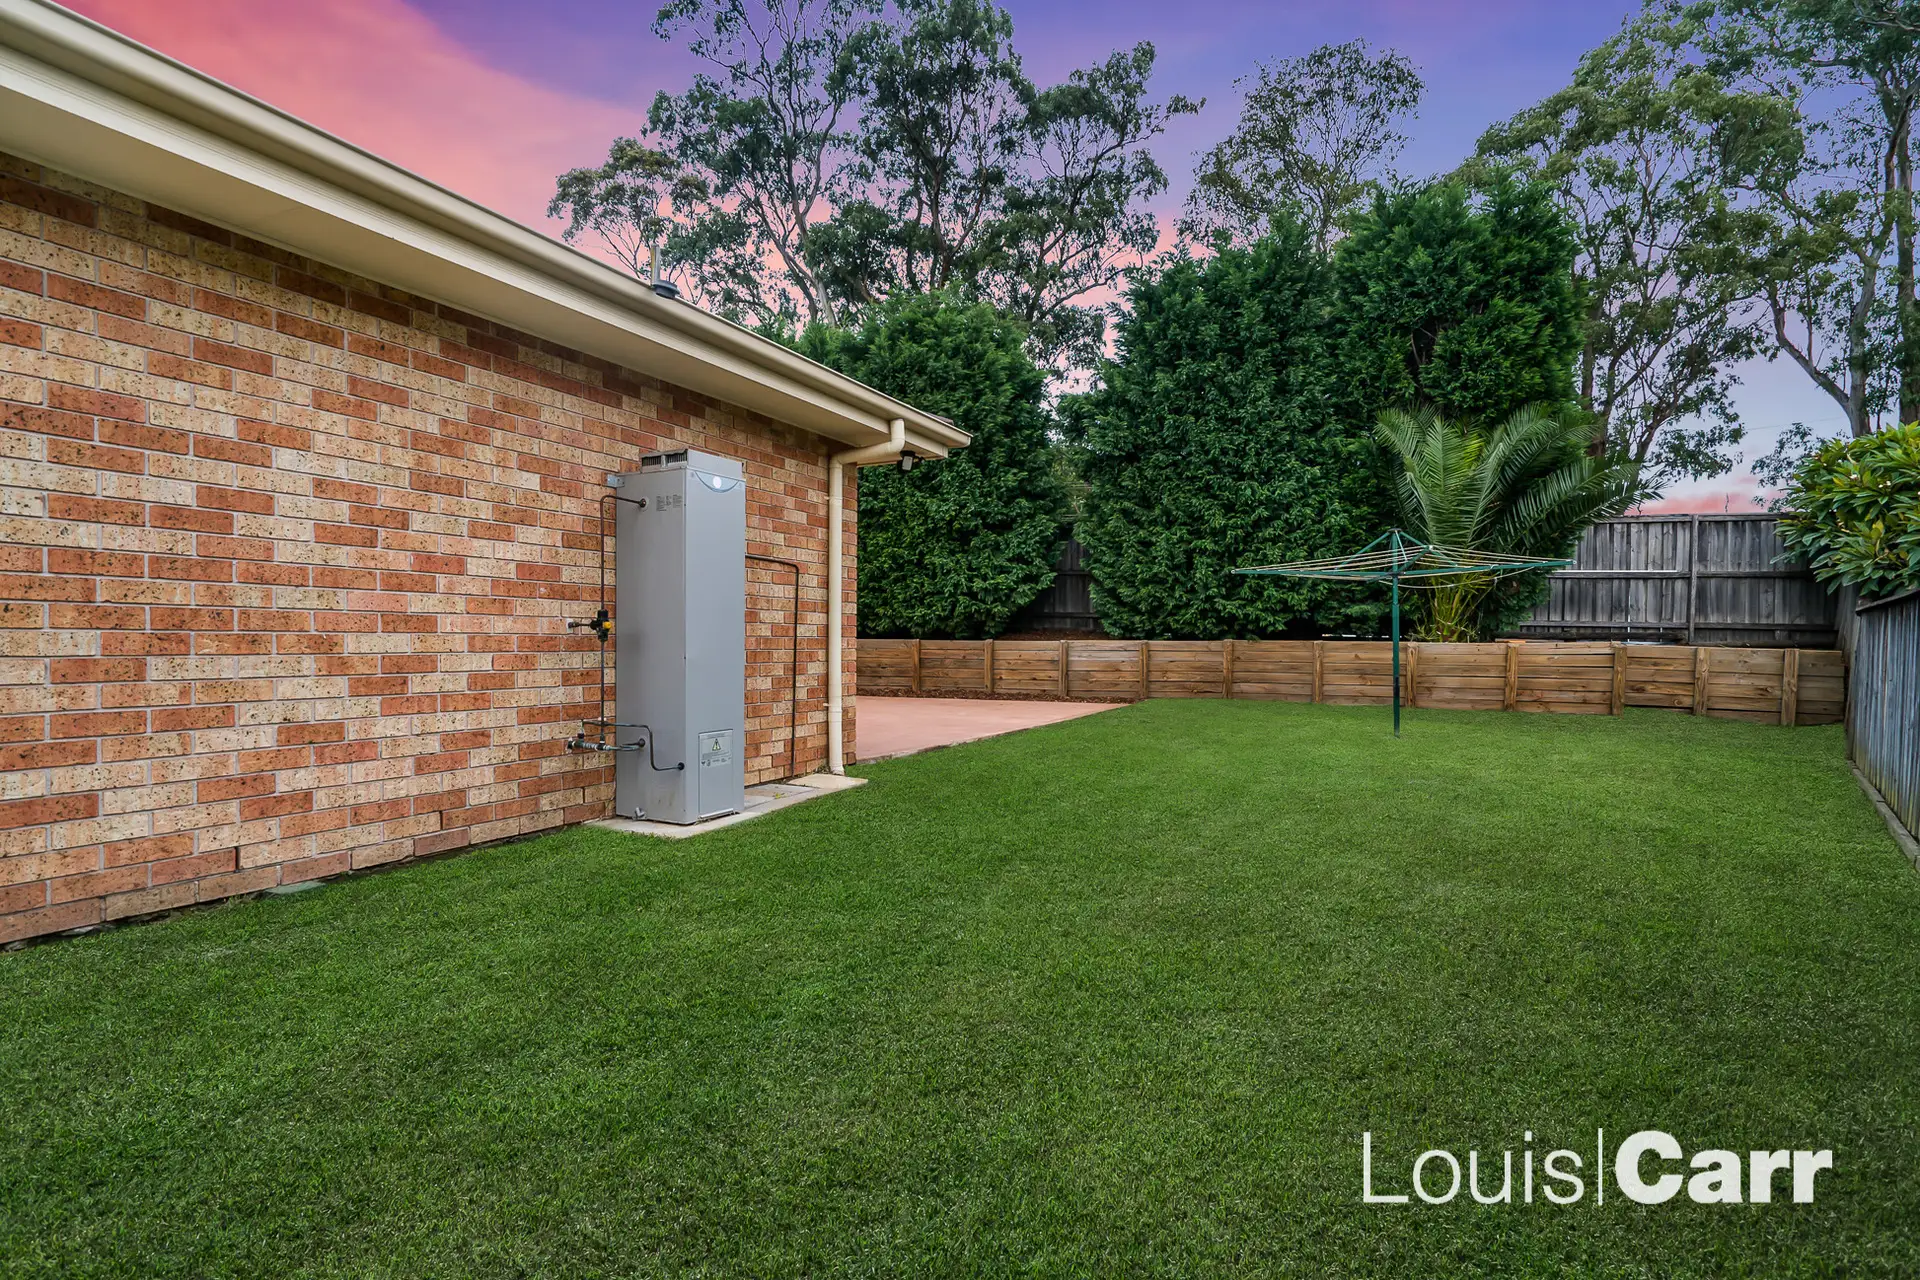 Photo #12: 44 Chepstow Drive, Castle Hill - Sold by Louis Carr Real Estate